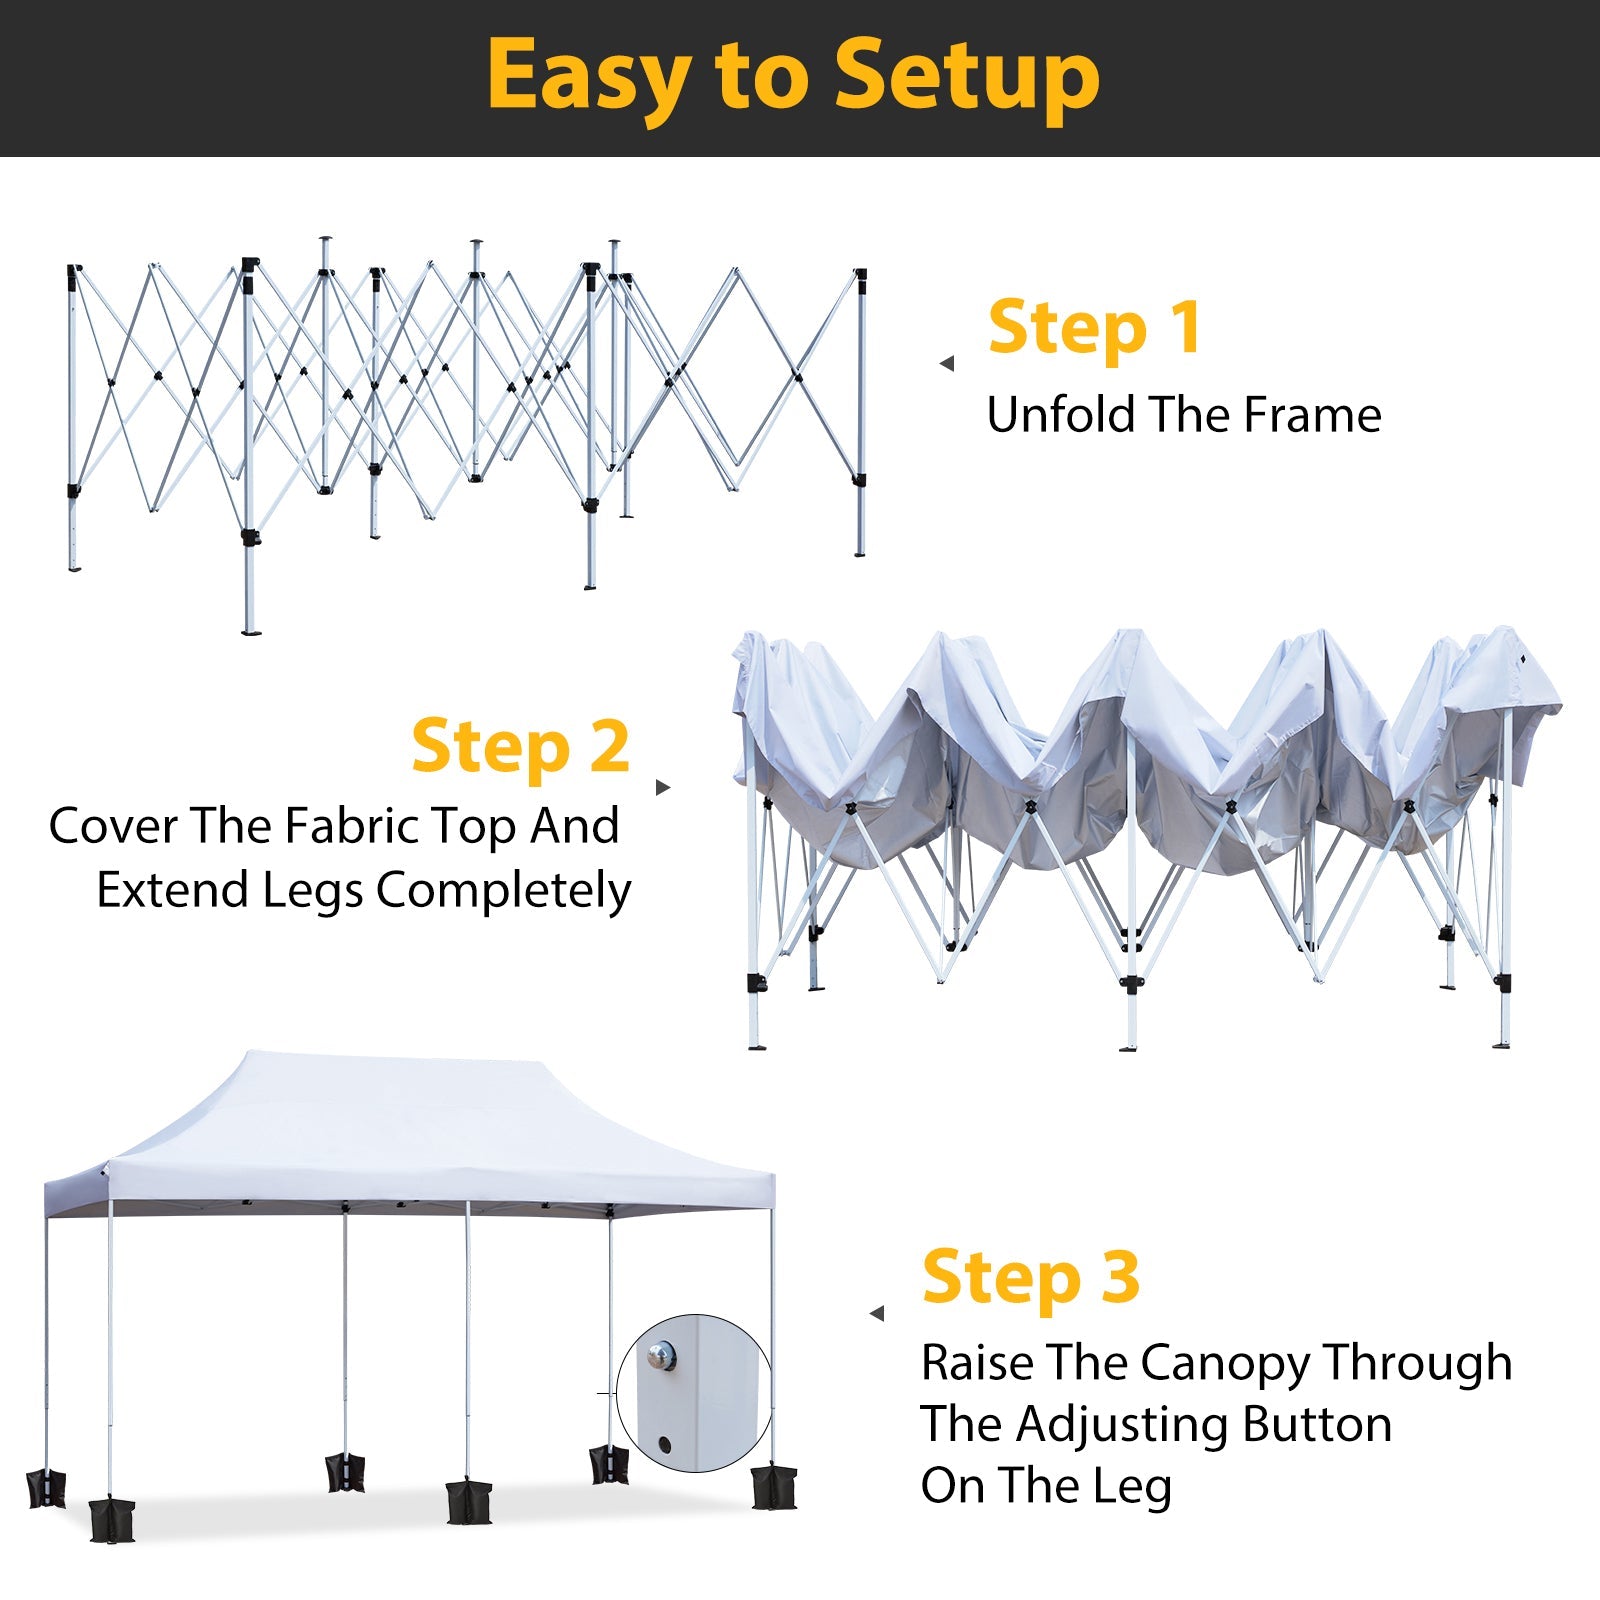 AVAWING 10x20FT Pop up Canopy Tent with Portable Wheeled with Roller Bag, Folding Patio Canopies Height Adjustable, Anti-UV & Waterproof for Parties, Camping, Commercial with Sandbags x 4(White)